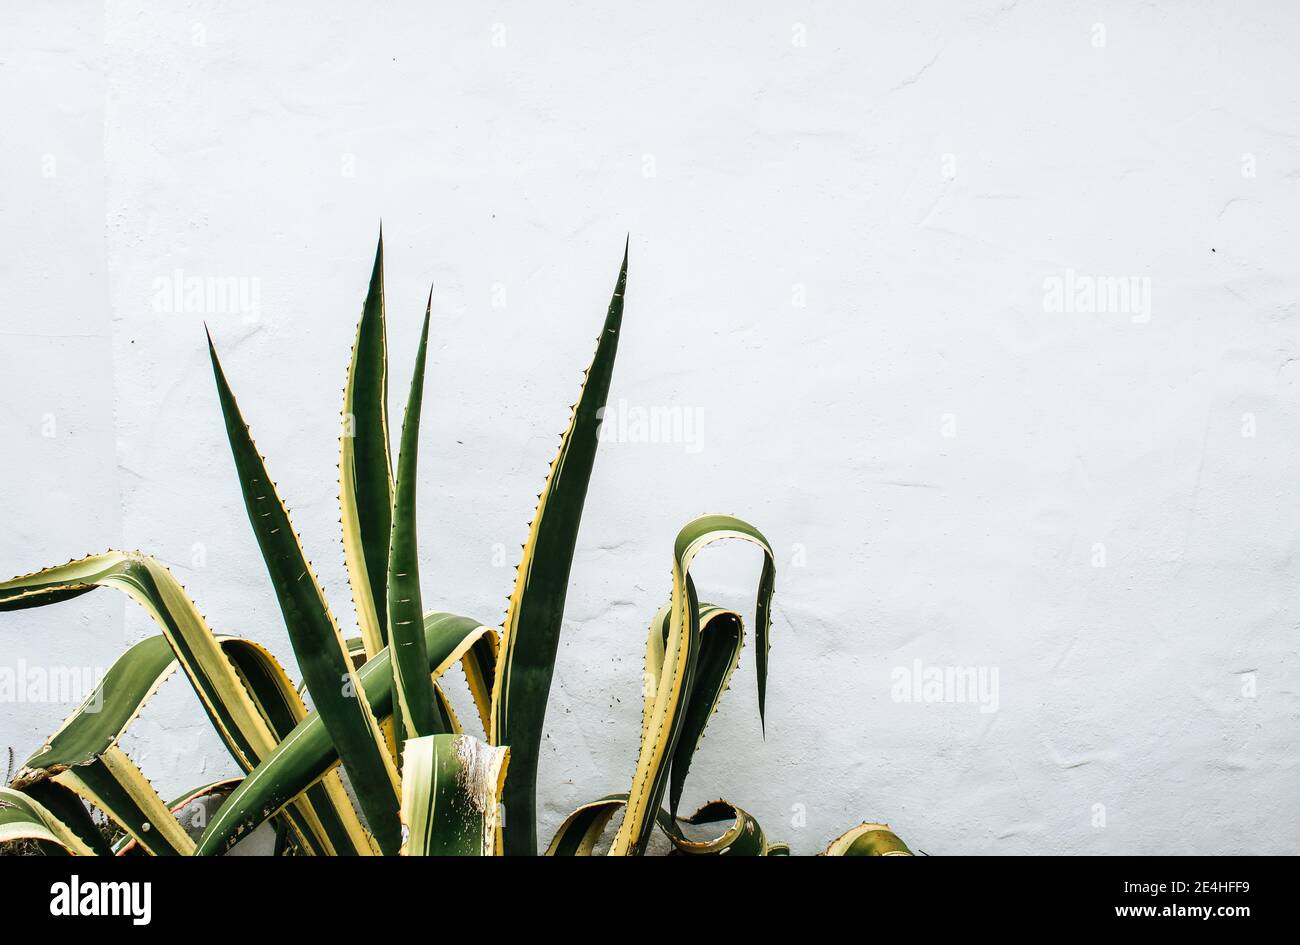 Close up of a Mother-in-Law's Tongue plant (Sansevieria trifasciata) growing isolated in front of a white stone wall Stock Photo